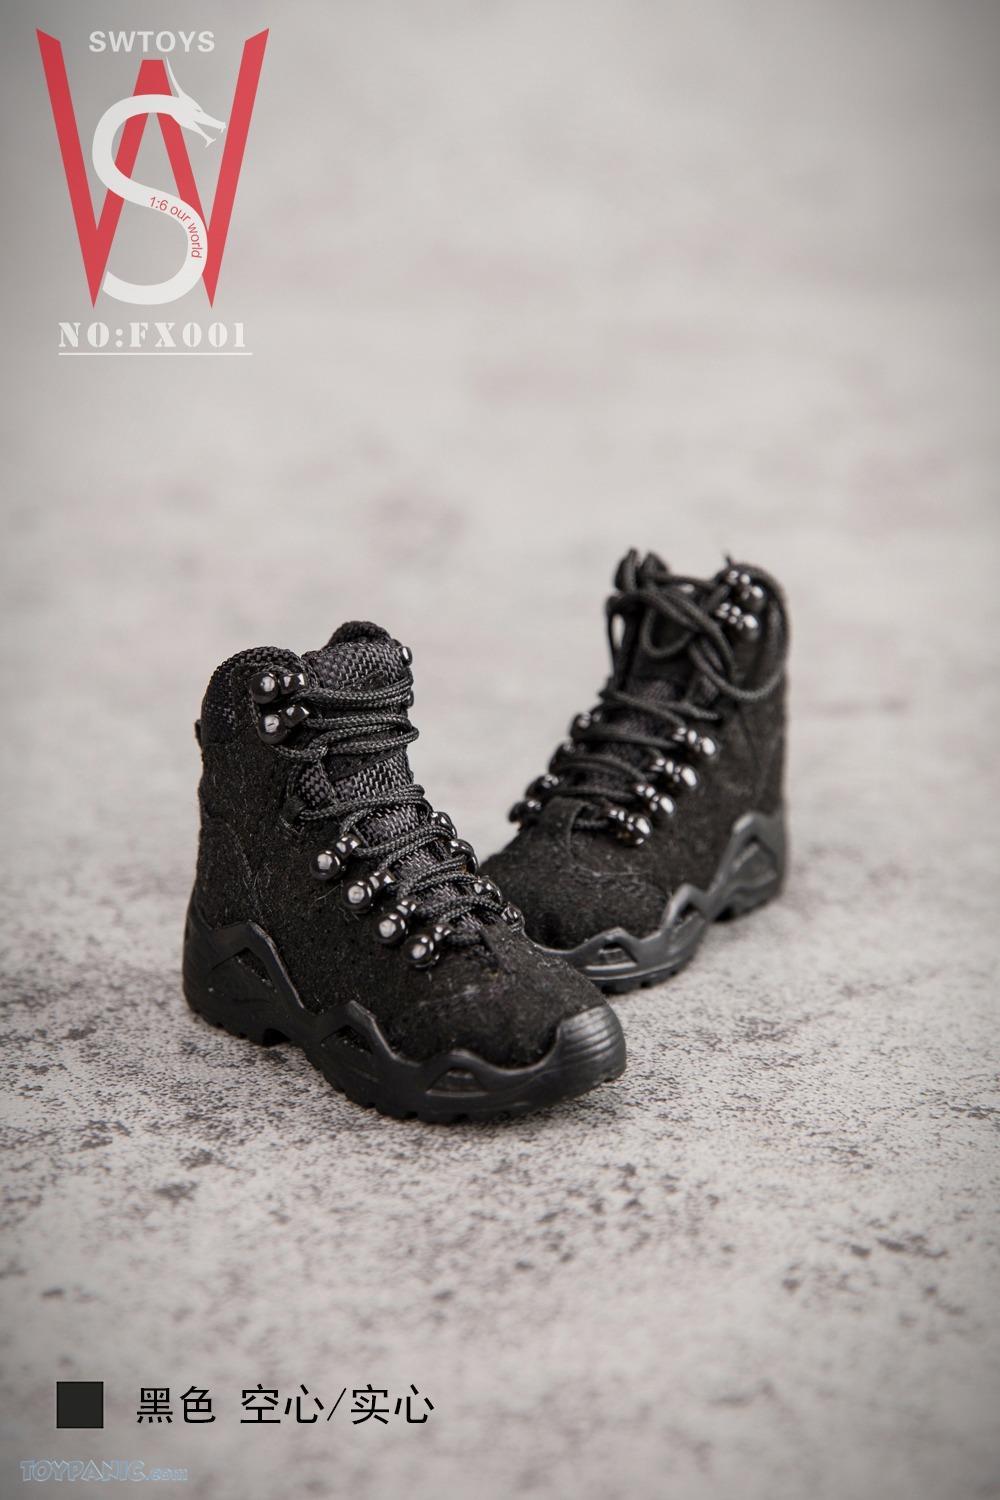 SWToys - NEW PRODUCT: SWToys: Men's Tactical Military Boots (Hollow) (4 colors) 28820213